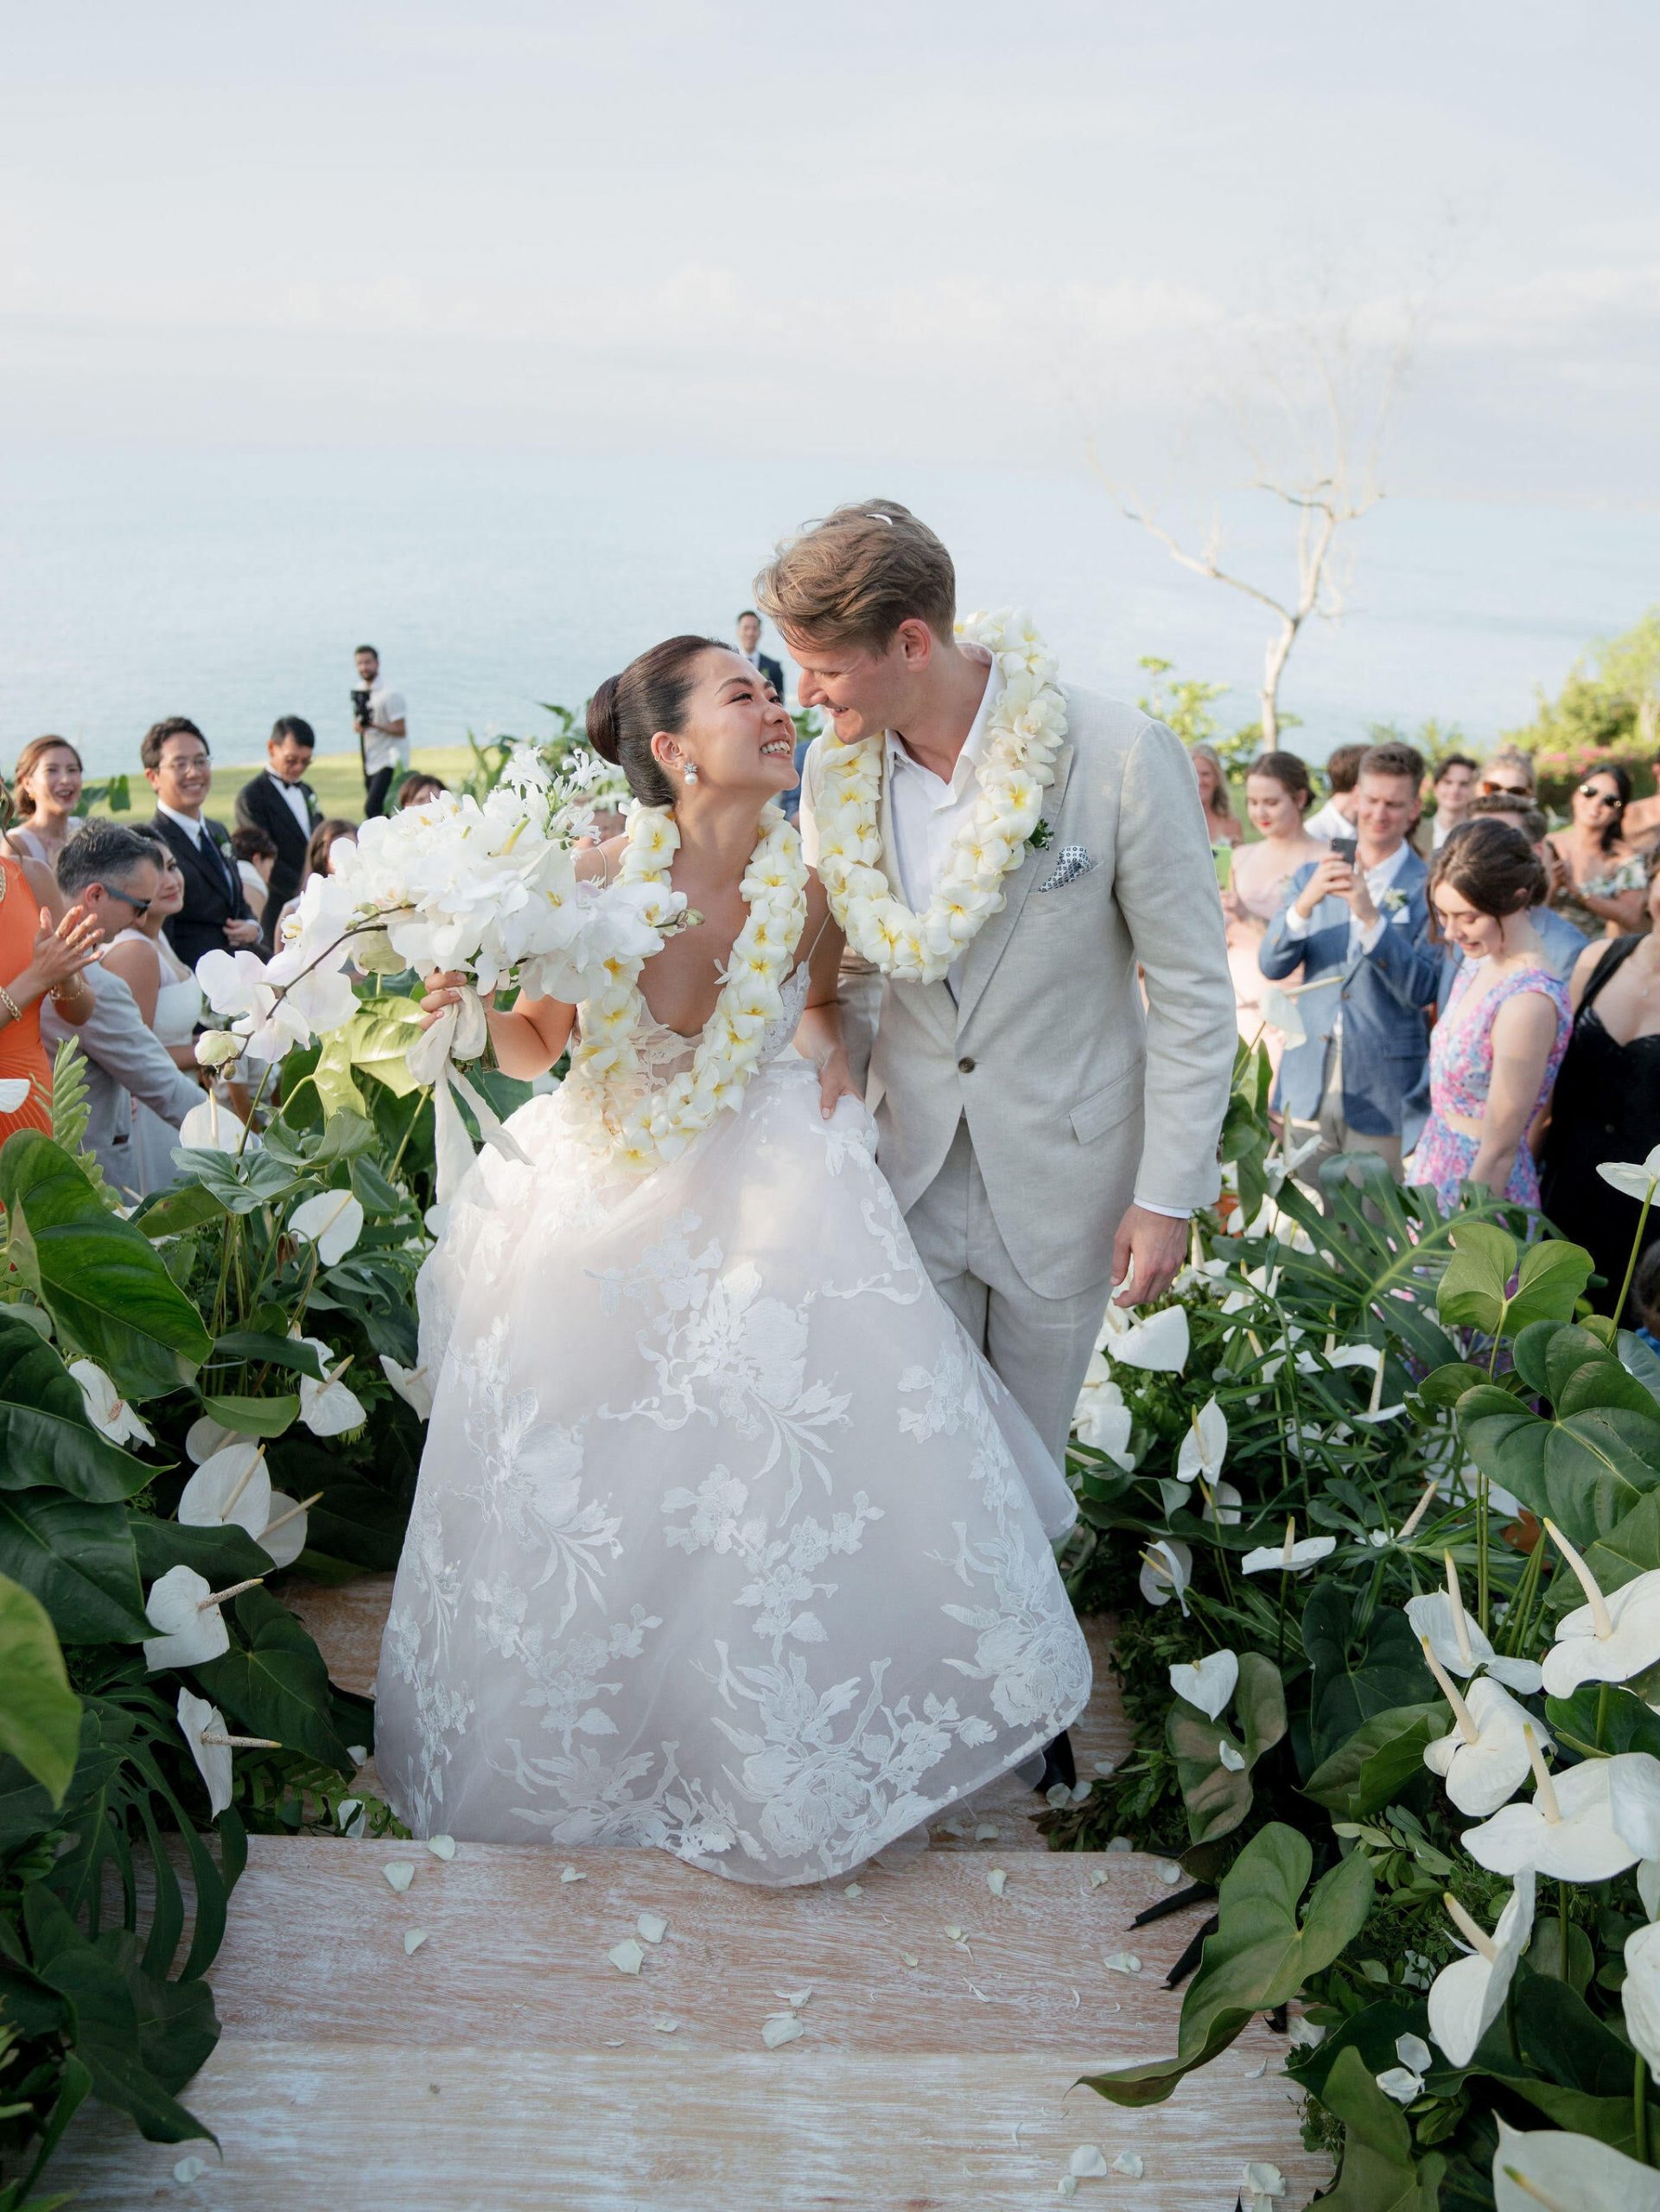 This Bride Wore A Lace Monique Lhuillier Gown For Her Deeply Personal Wedding Under Frangipani Trees In Bali